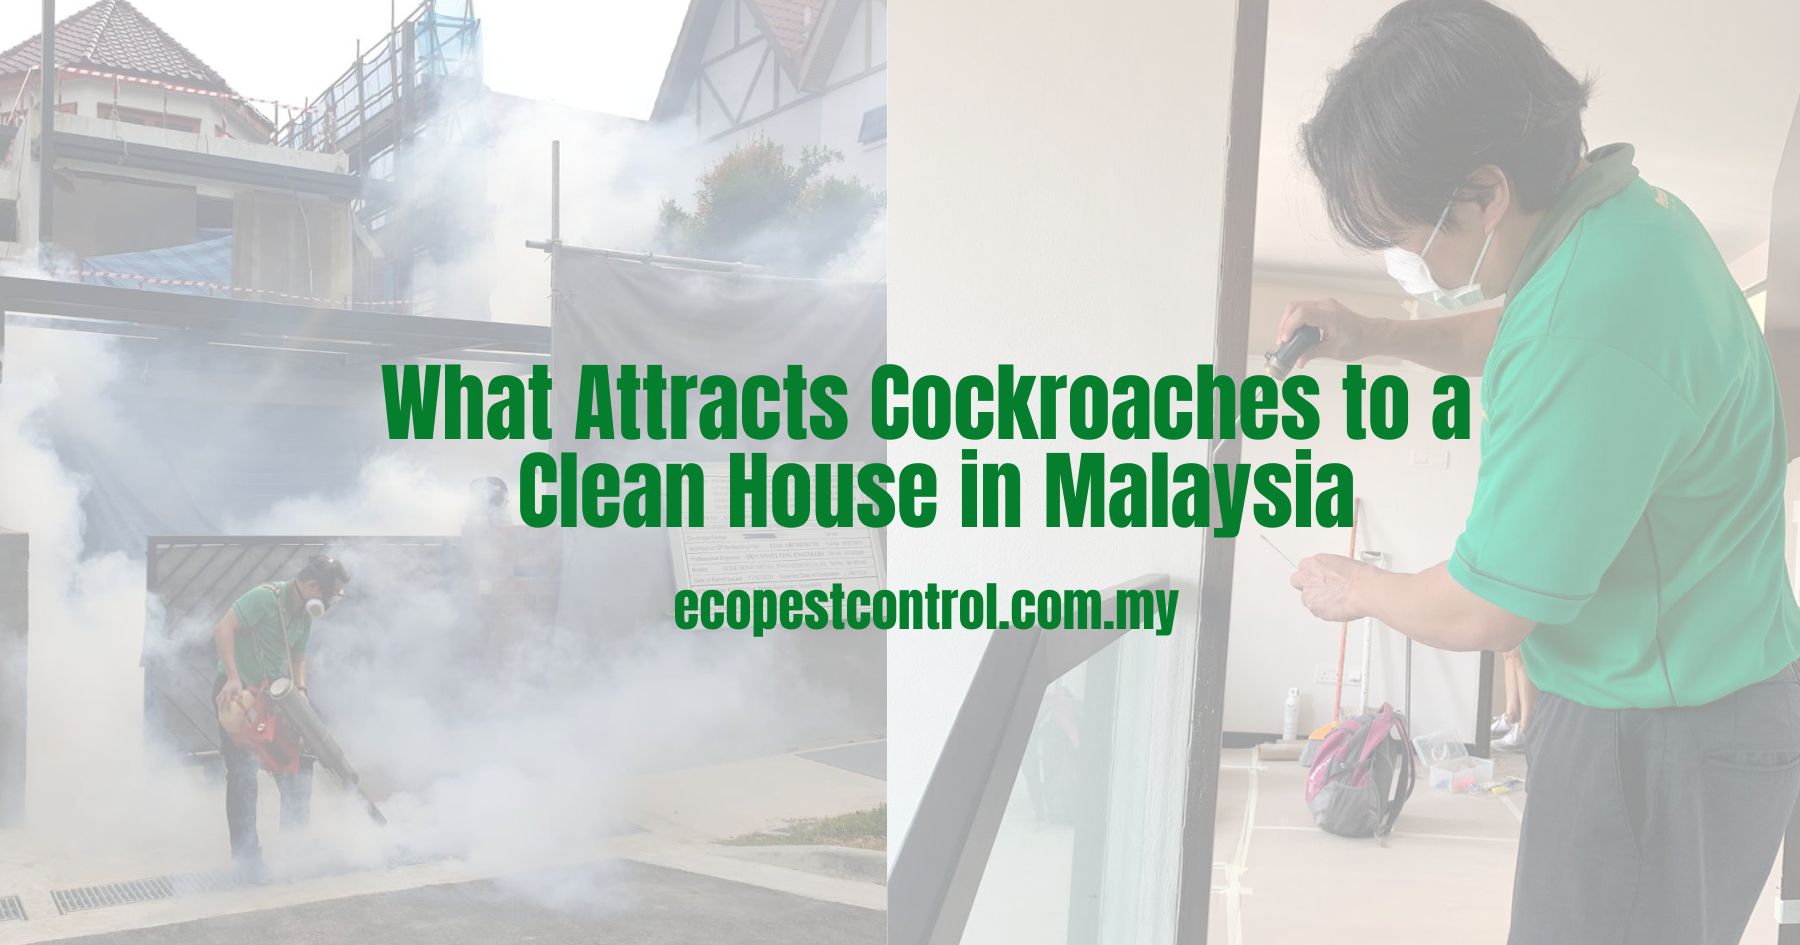 What Attracts Cockroaches to a Clean House in Malaysia